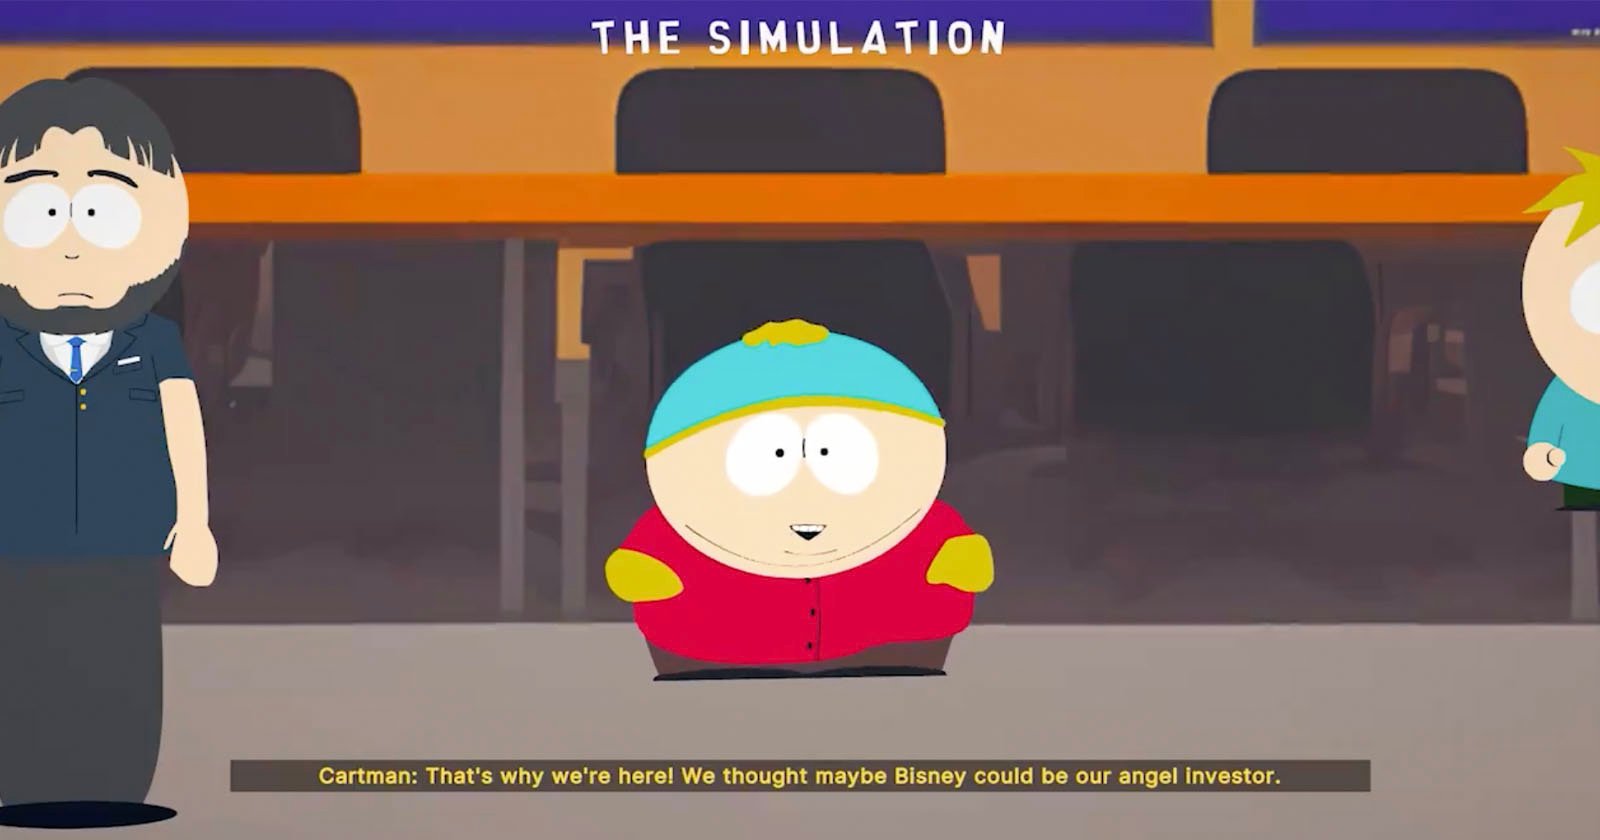 South Park - What was the first episode of South Park you ever watched?